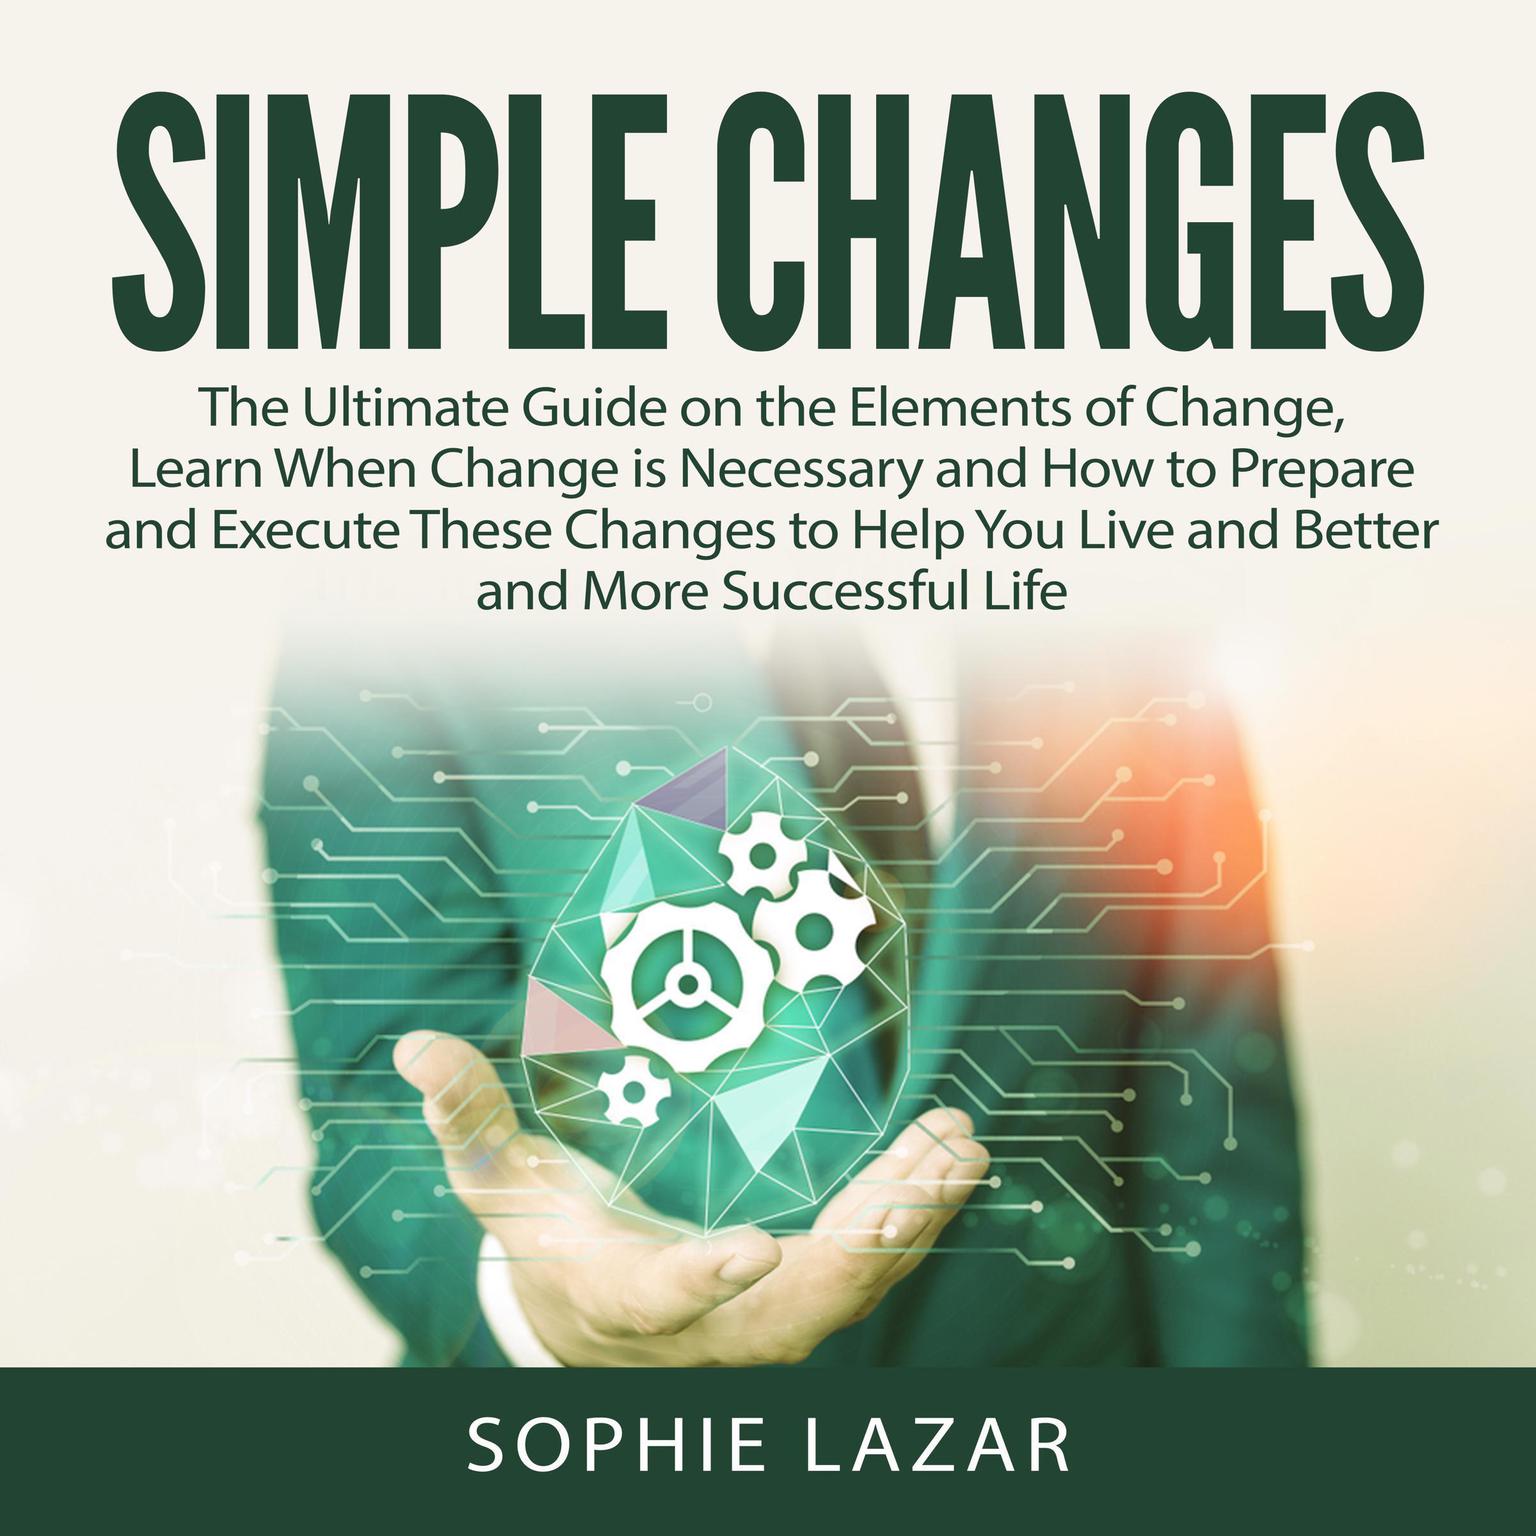 Simple Changes:: The Ultimate Guide on the Elements of Change, Learn When Change is Necessary and How to Prepare and Execute These Changes to Help You Live and Better and More Successful Life  Audiobook, by Sophie Lazar